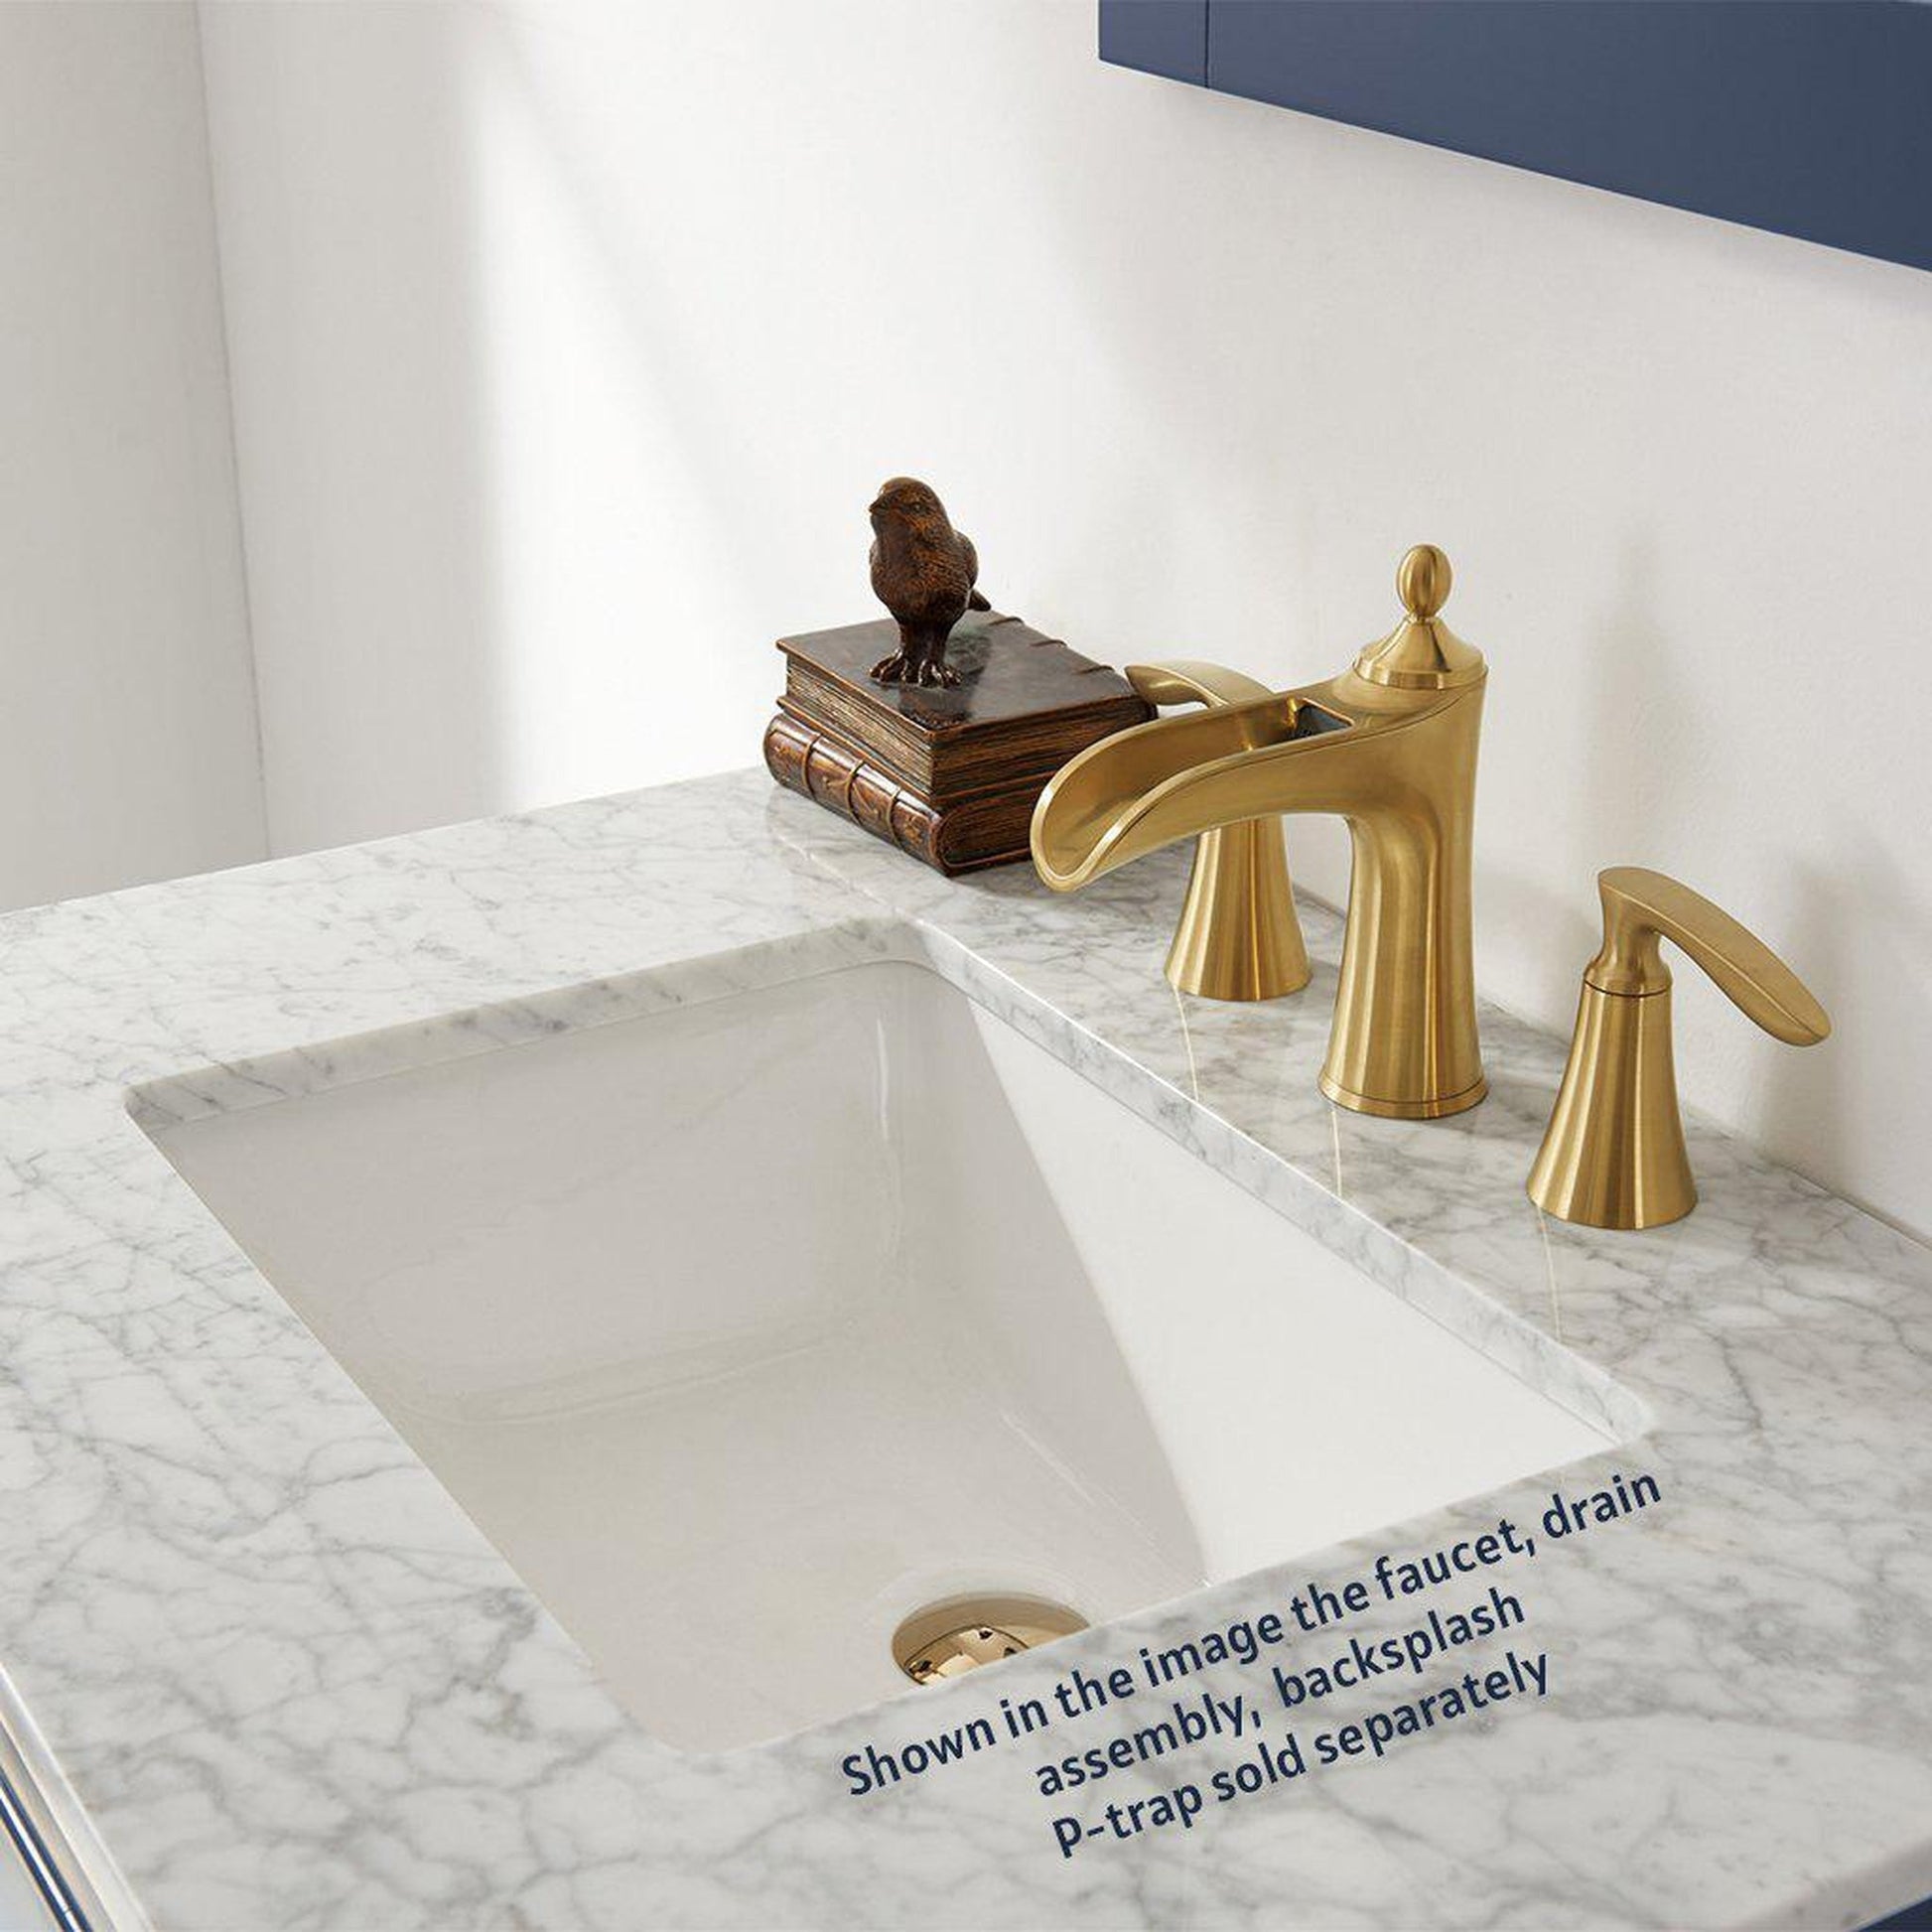 Altair Ivy 30" Single Royal Blue Freestanding Bathroom Vanity Set With Mirror, Natural Carrara White Marble Top, Rectangular Undermount Ceramic Sink, and Overflow